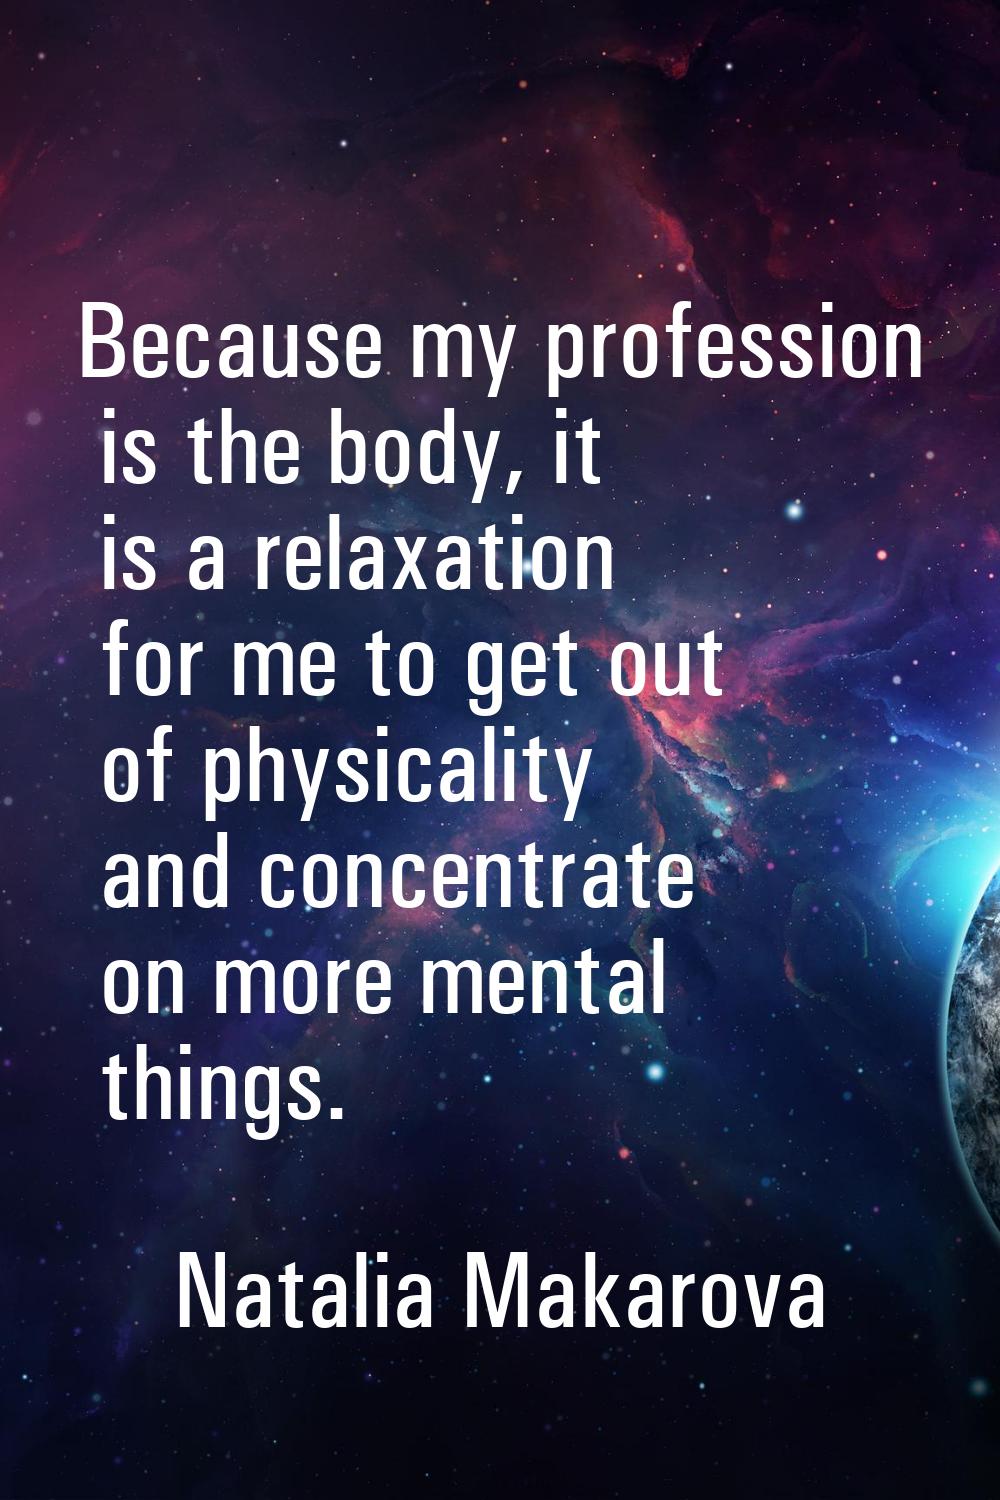 Because my profession is the body, it is a relaxation for me to get out of physicality and concentr